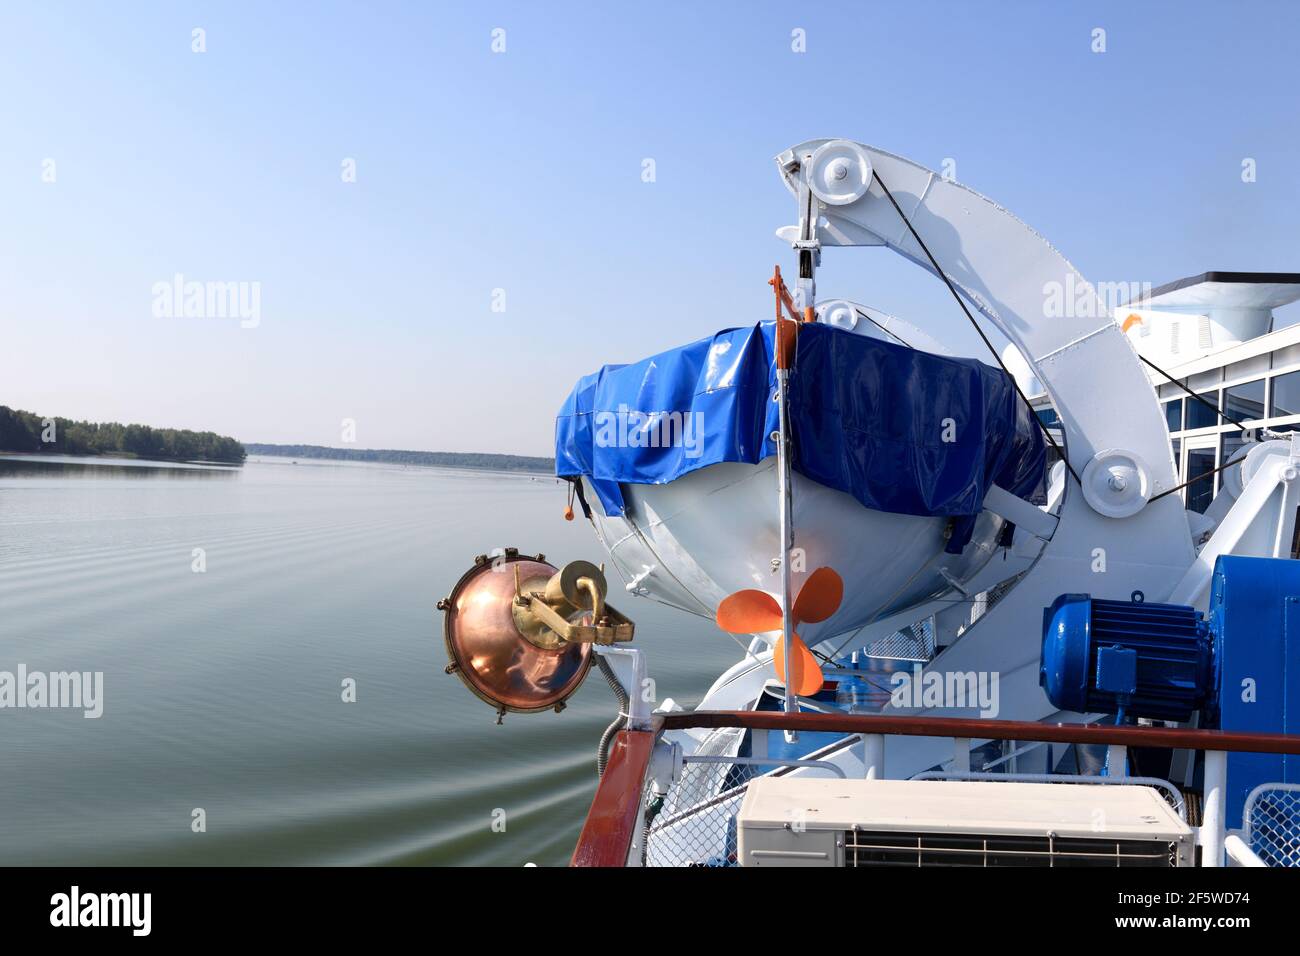 Details of a lifeboat on the ship Stock Photo